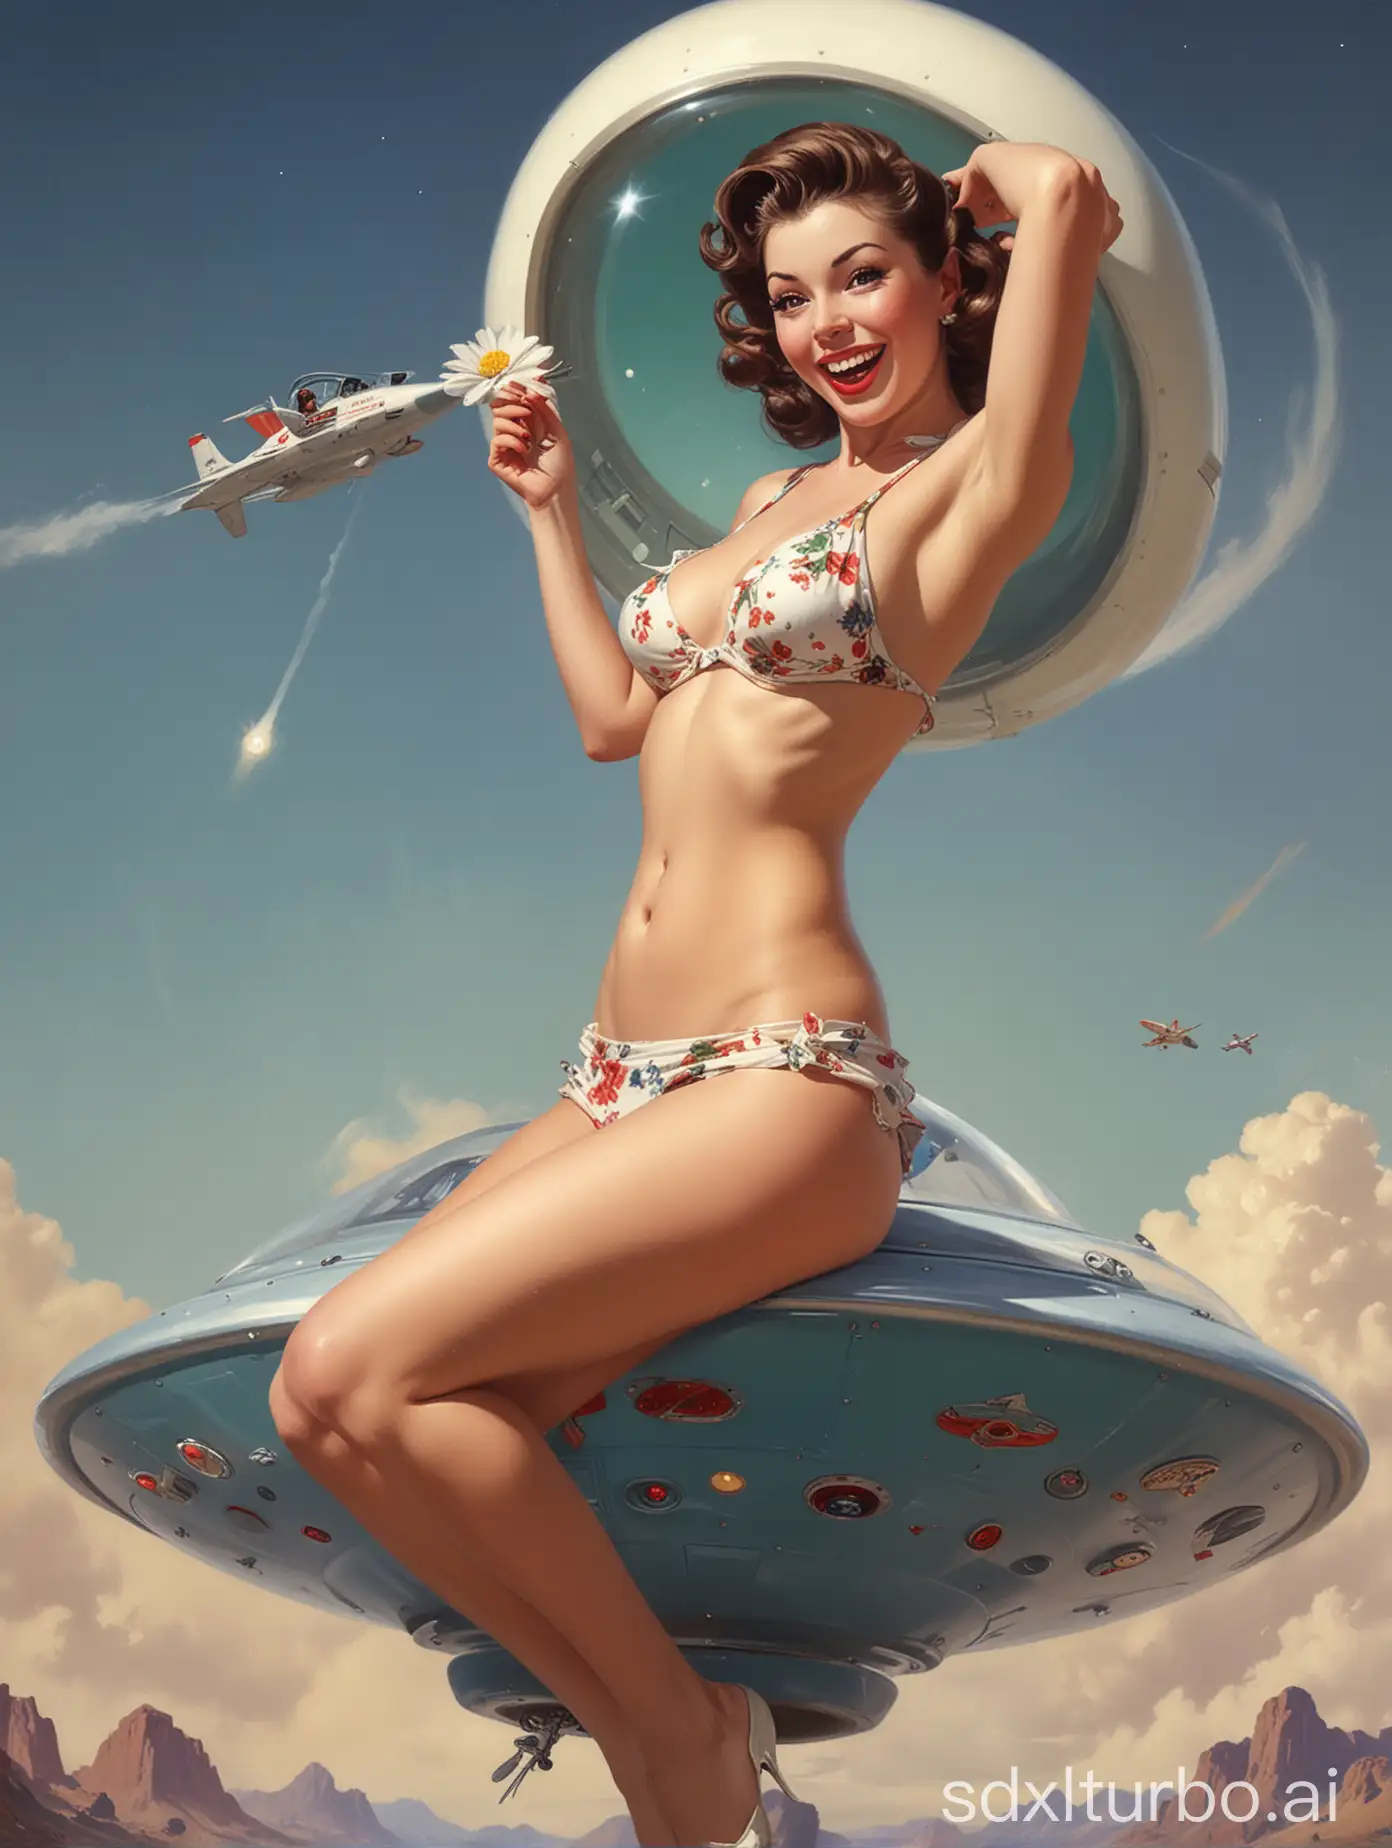 a painting of a woman  posing almost naked on a ufo womanizer,surprised and pleased by the feeling, by Art Frahm, by Gil Elvgren,   by Alberto Vargas, by Rolf Armstrong, pin-up poster girl,long hair wavy, 2015's haircut, picking up a flower, smiling fashion model face,tiny bikini ,  mischievous grin,  young lady, pinup